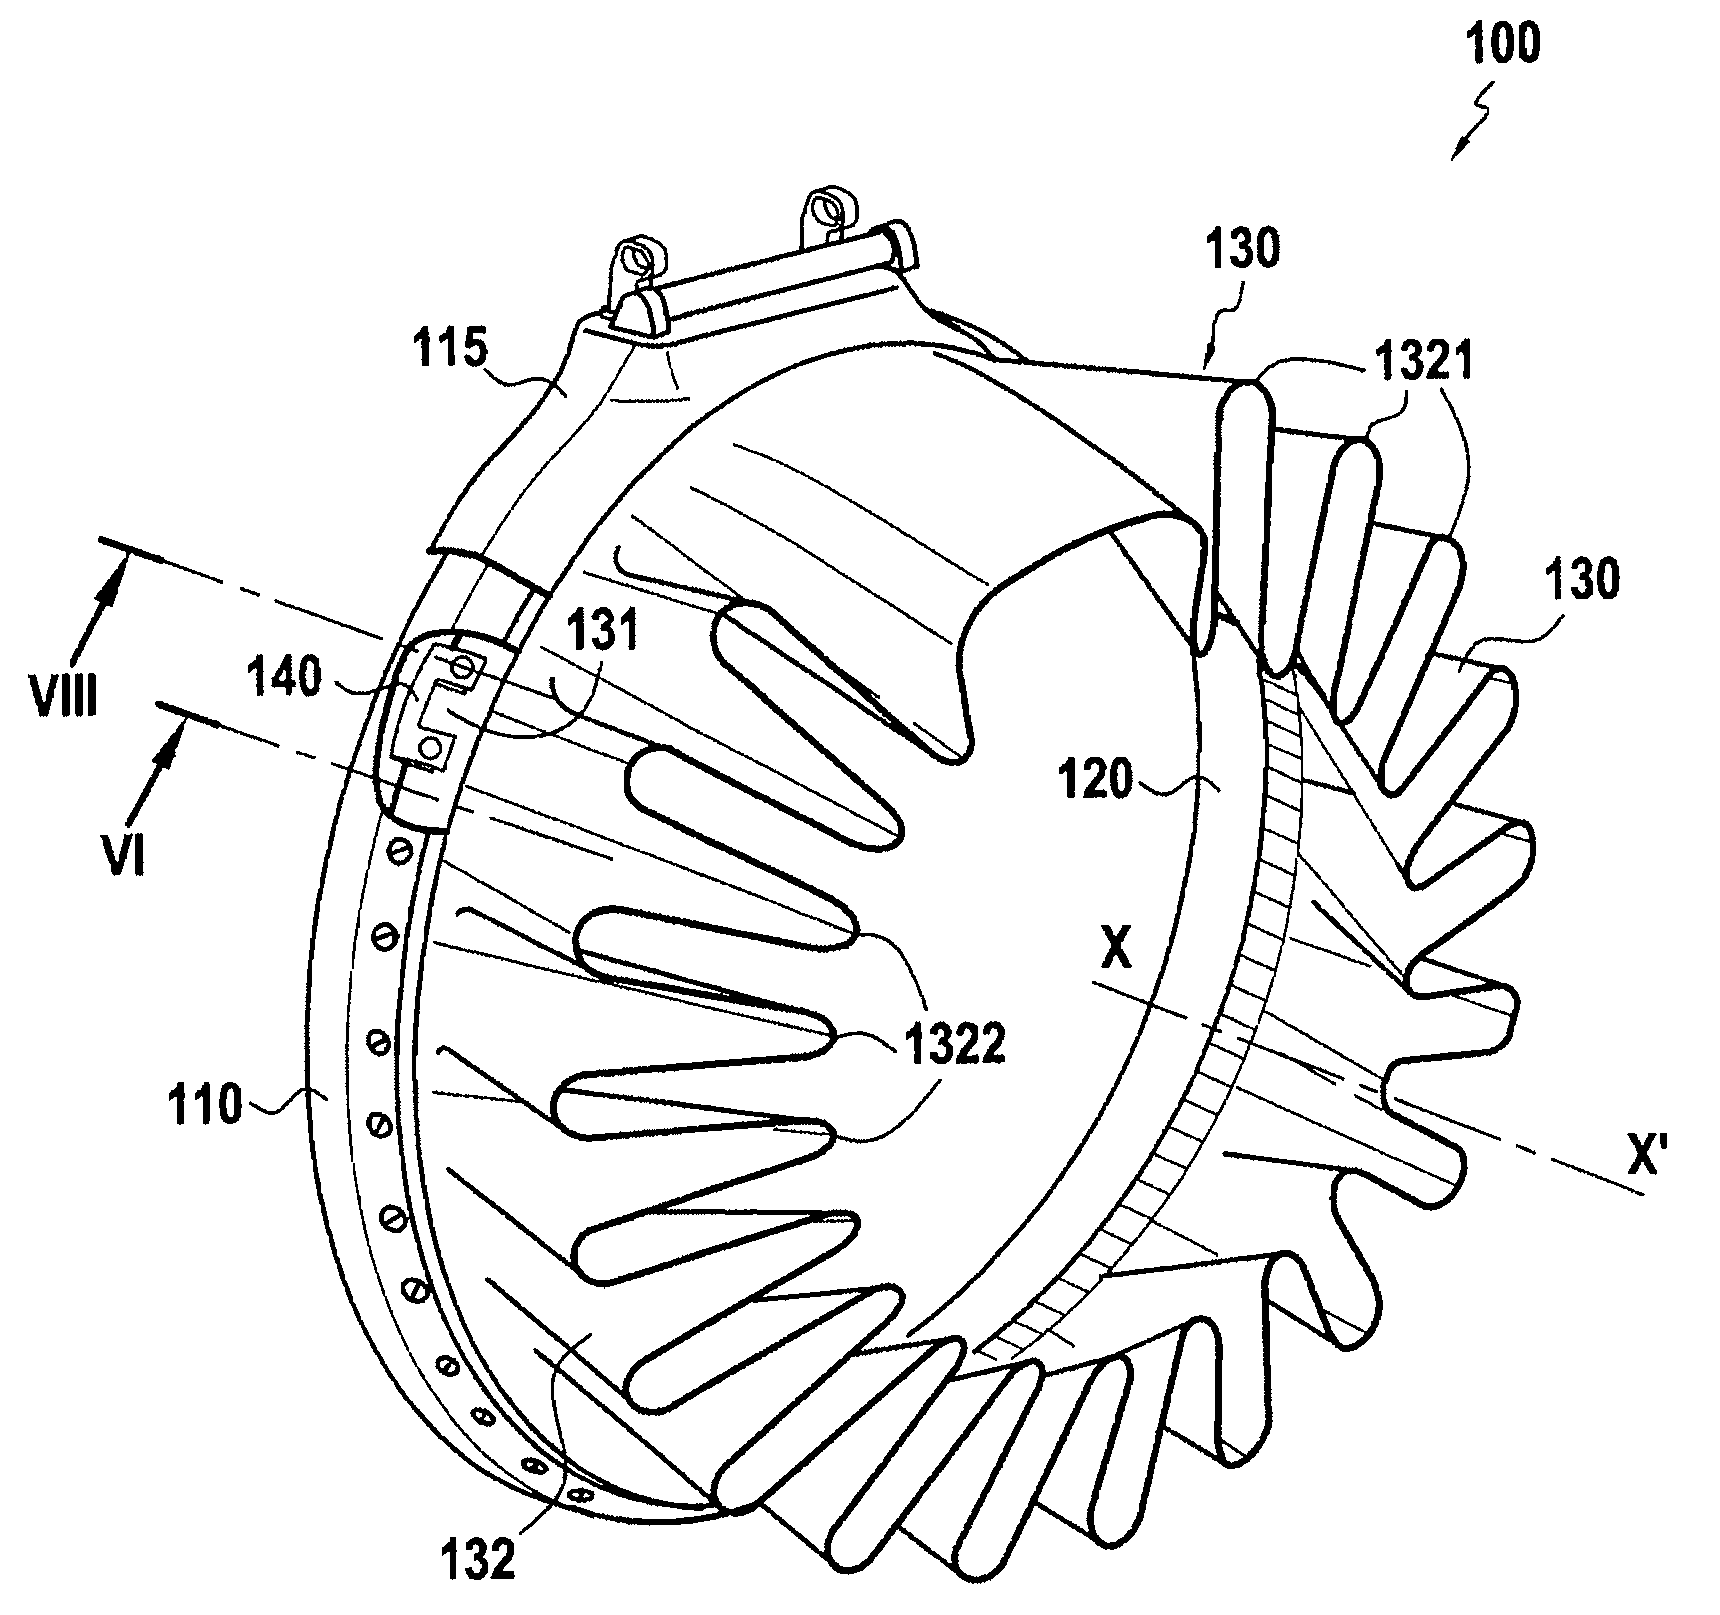 Cmc mixer with structural outer cowling